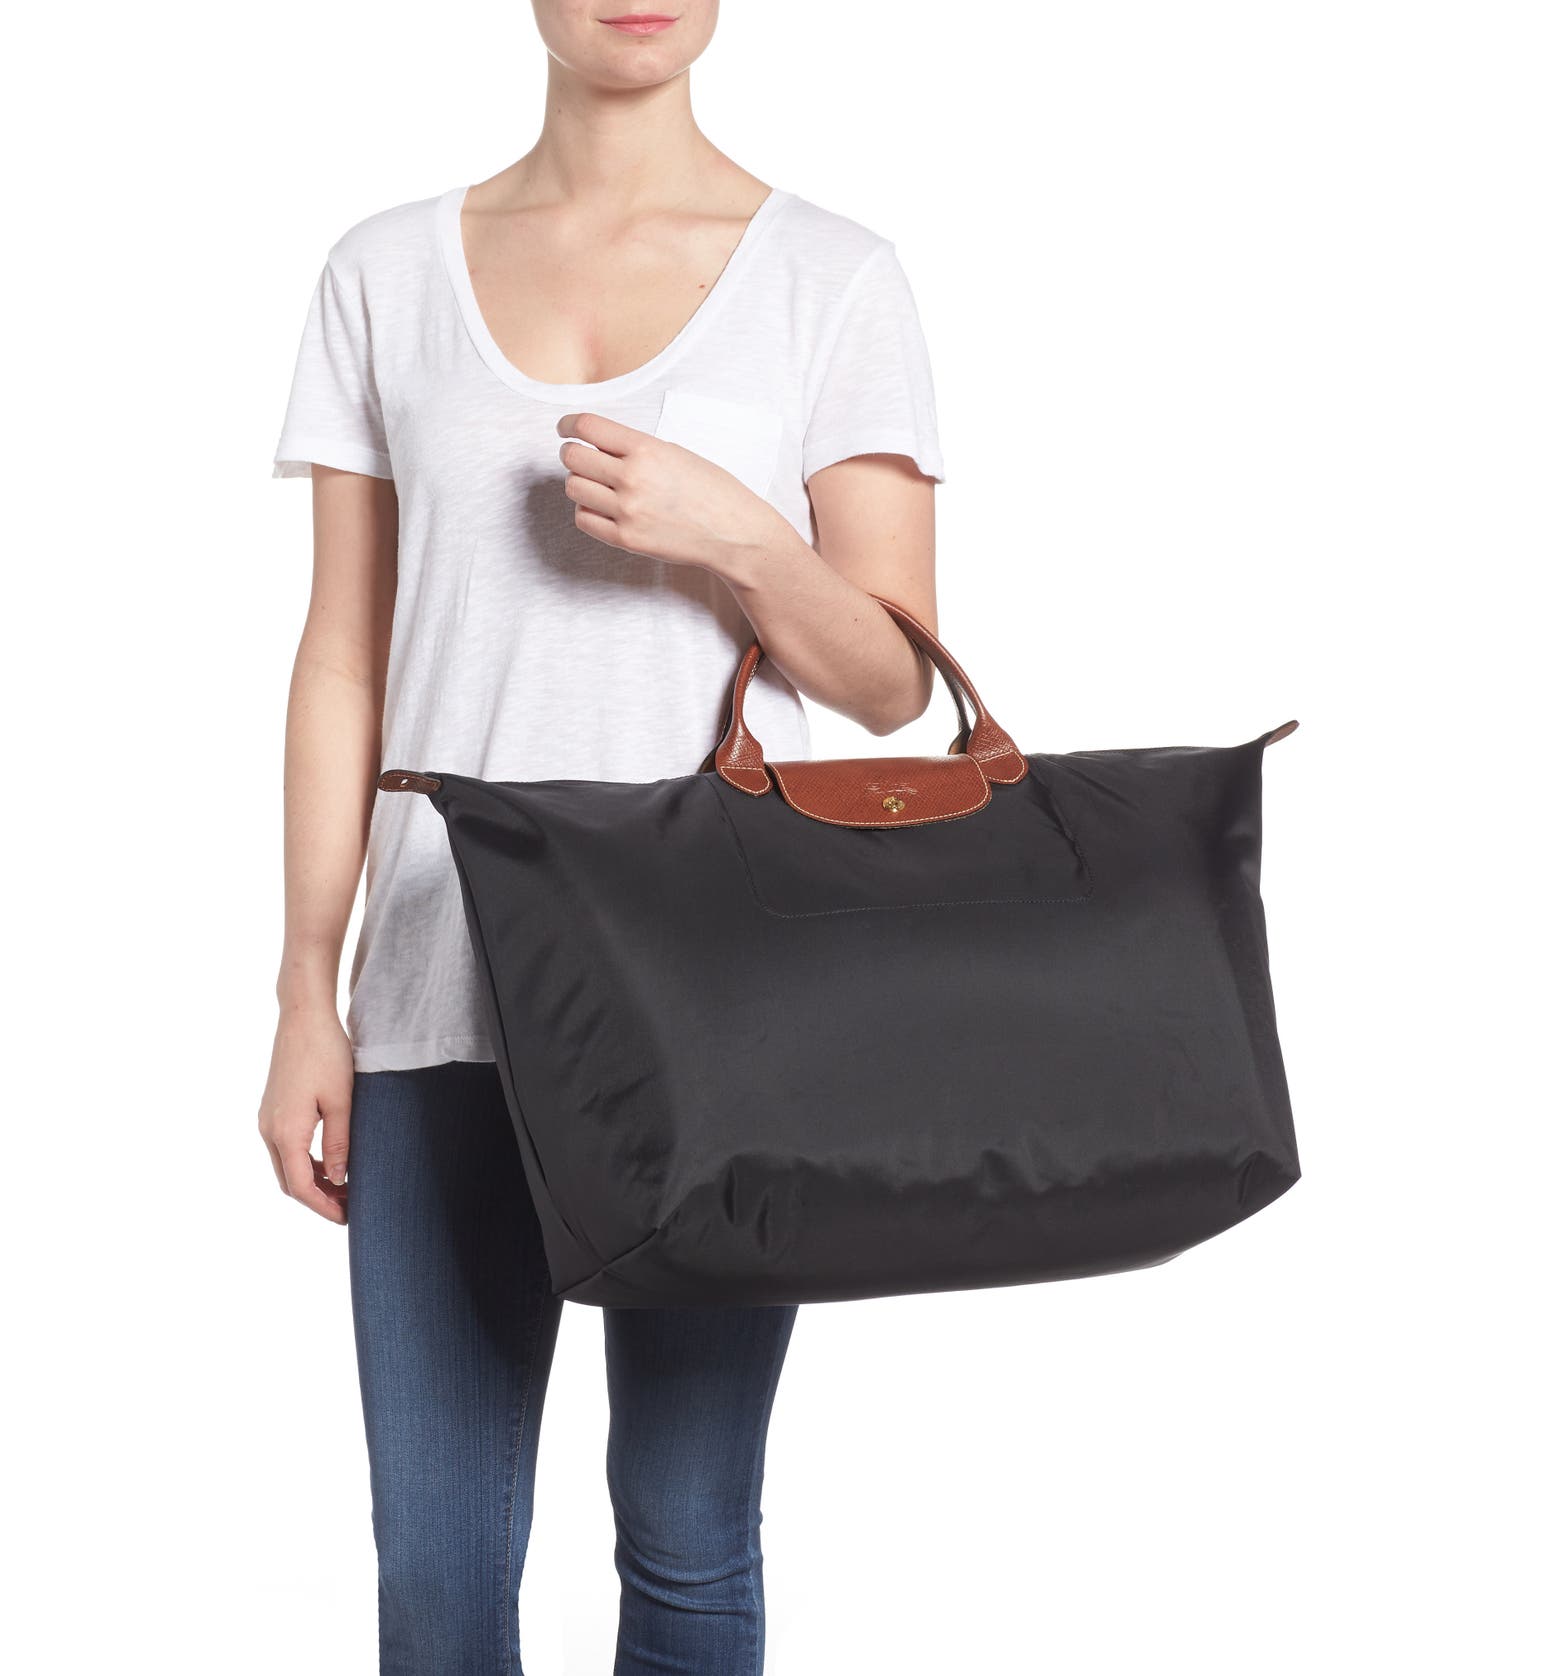 Longchamp 'Le Pliage' Overnighter | Nordstrom